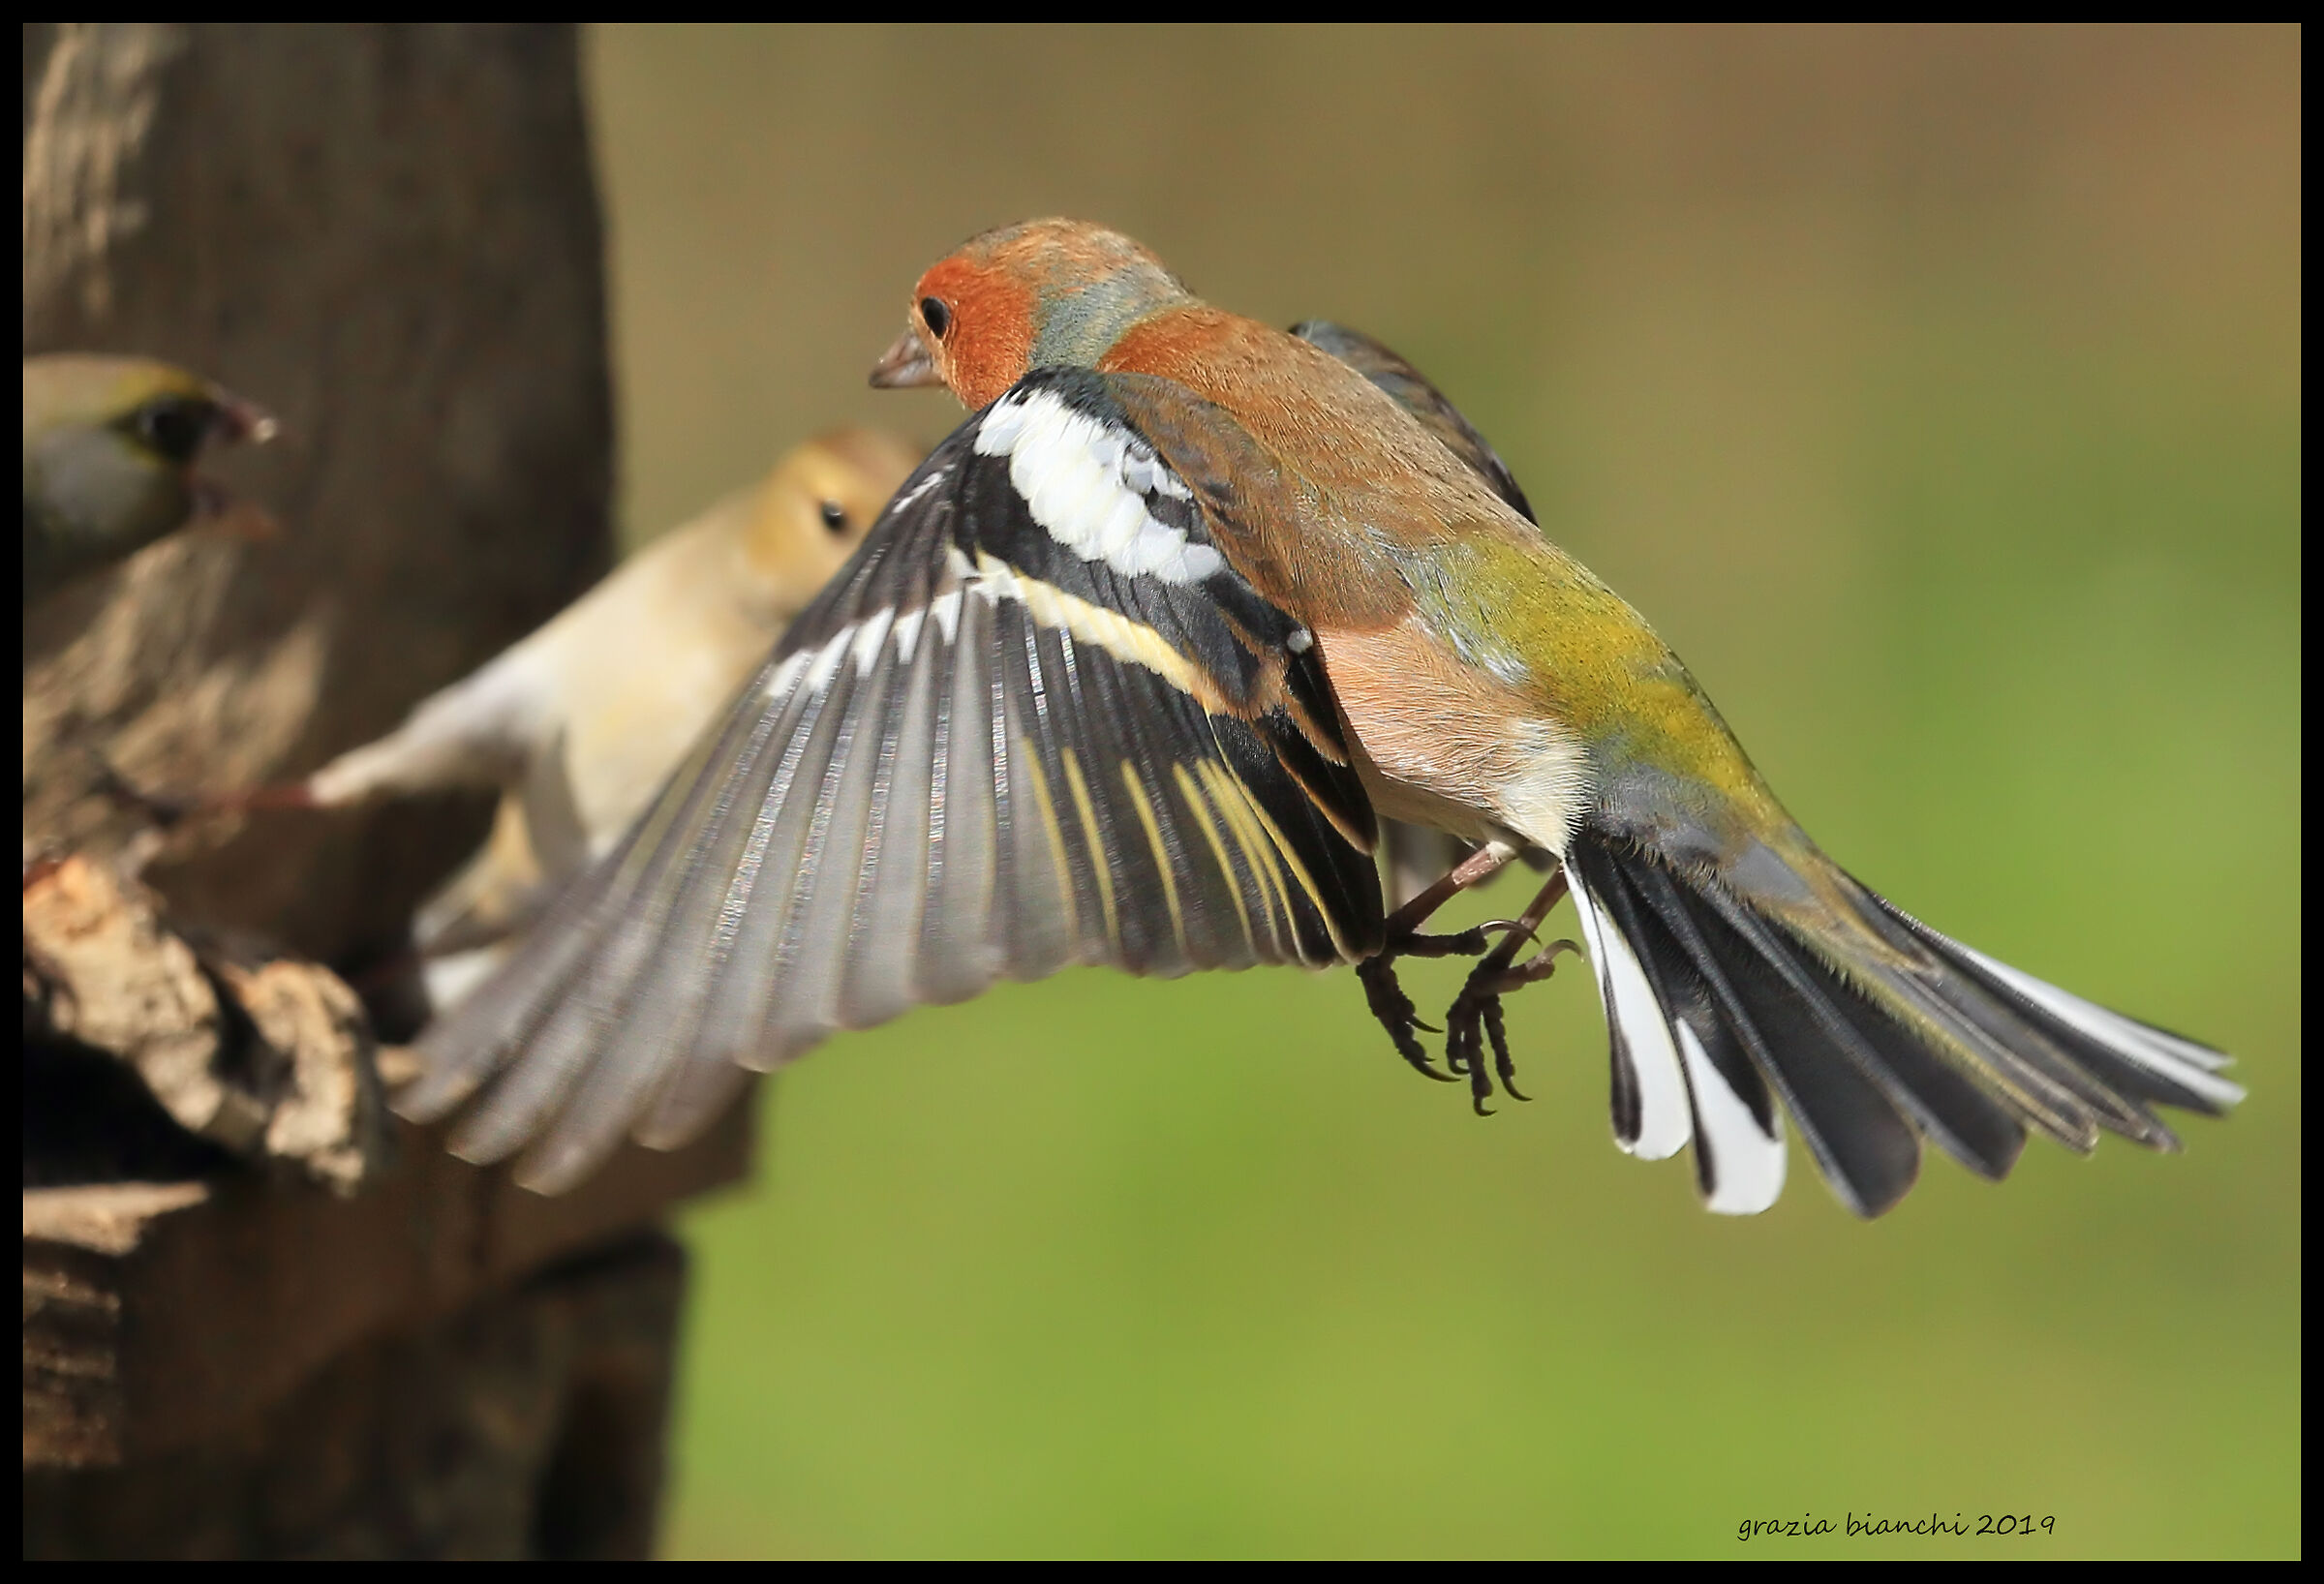 Male finches...